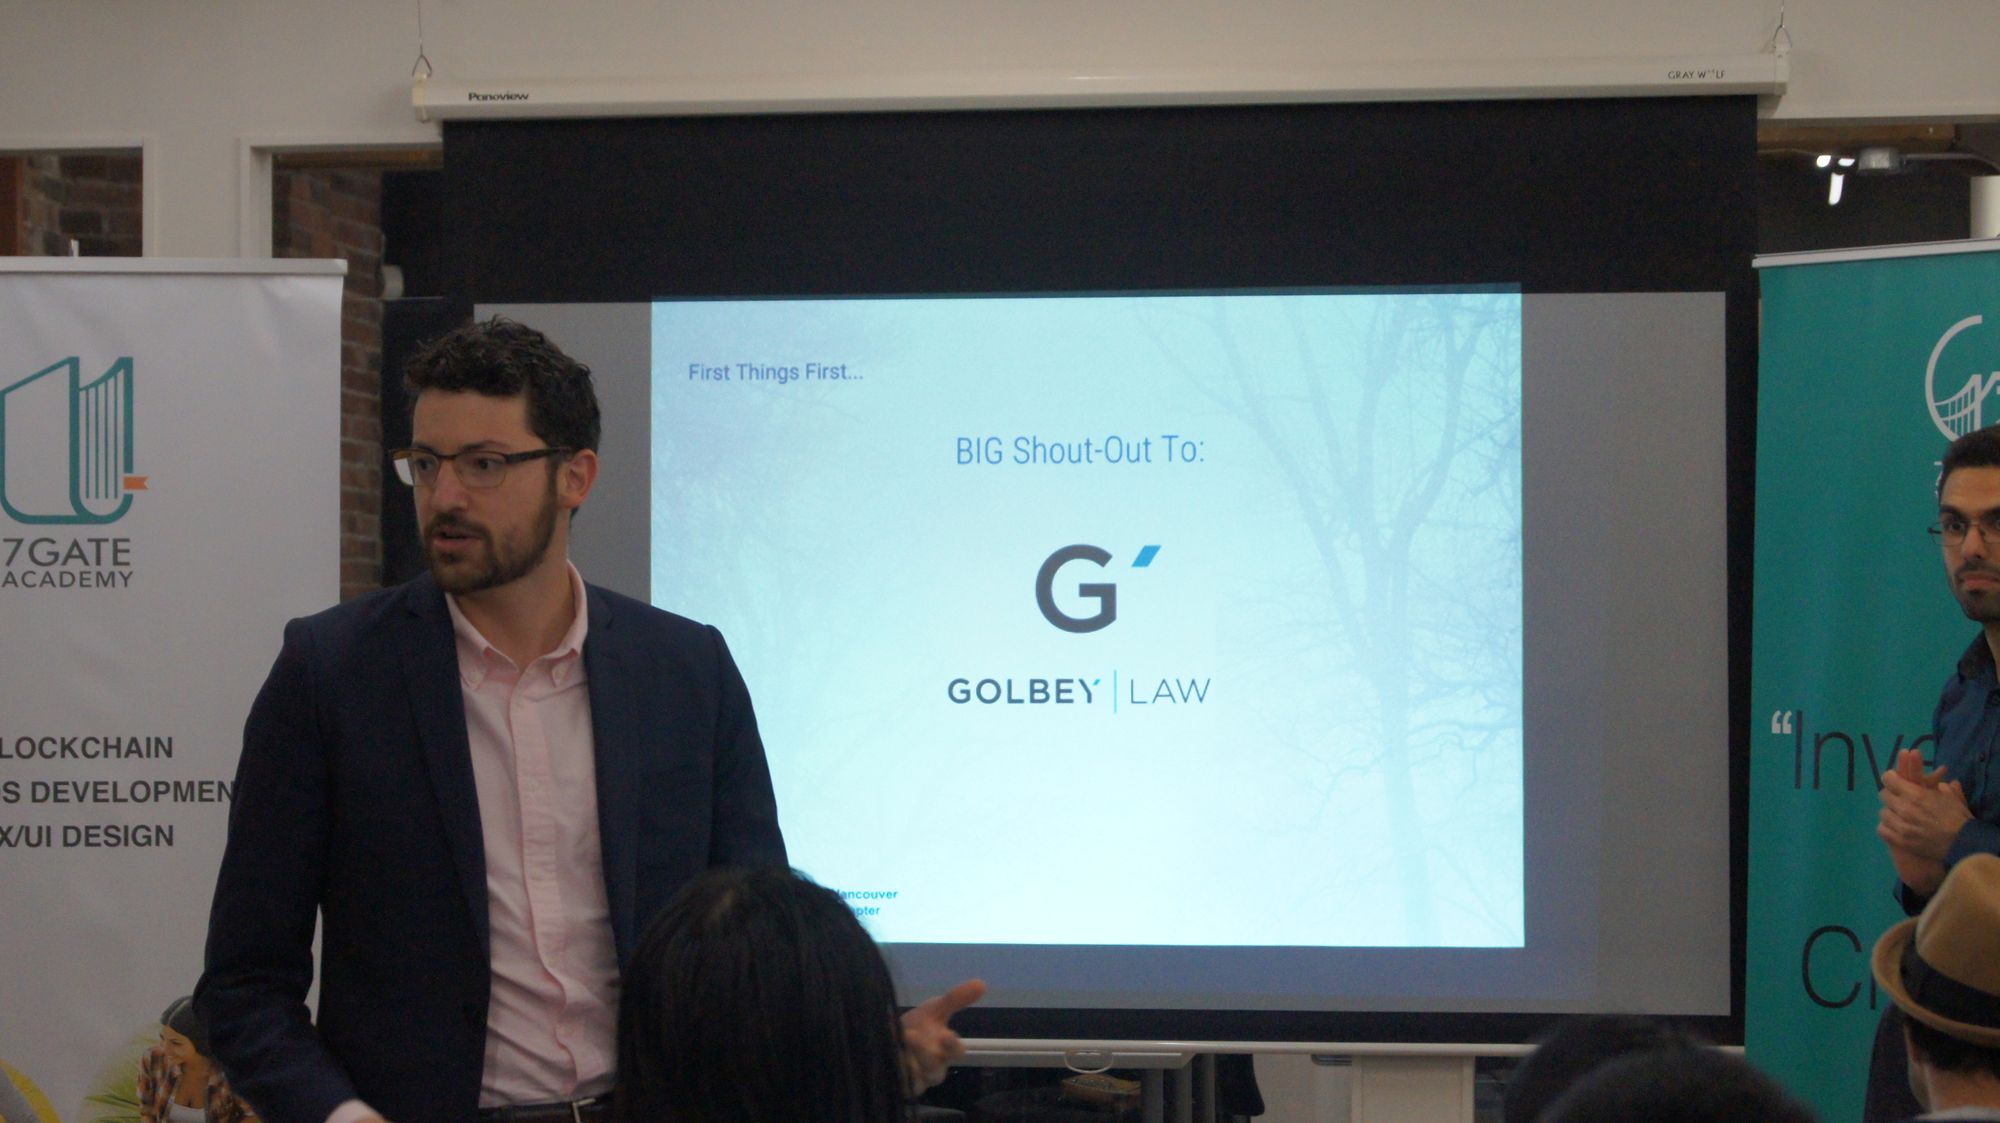 Justin gives an introduction about Golbey Law and wishes everyone good luck.